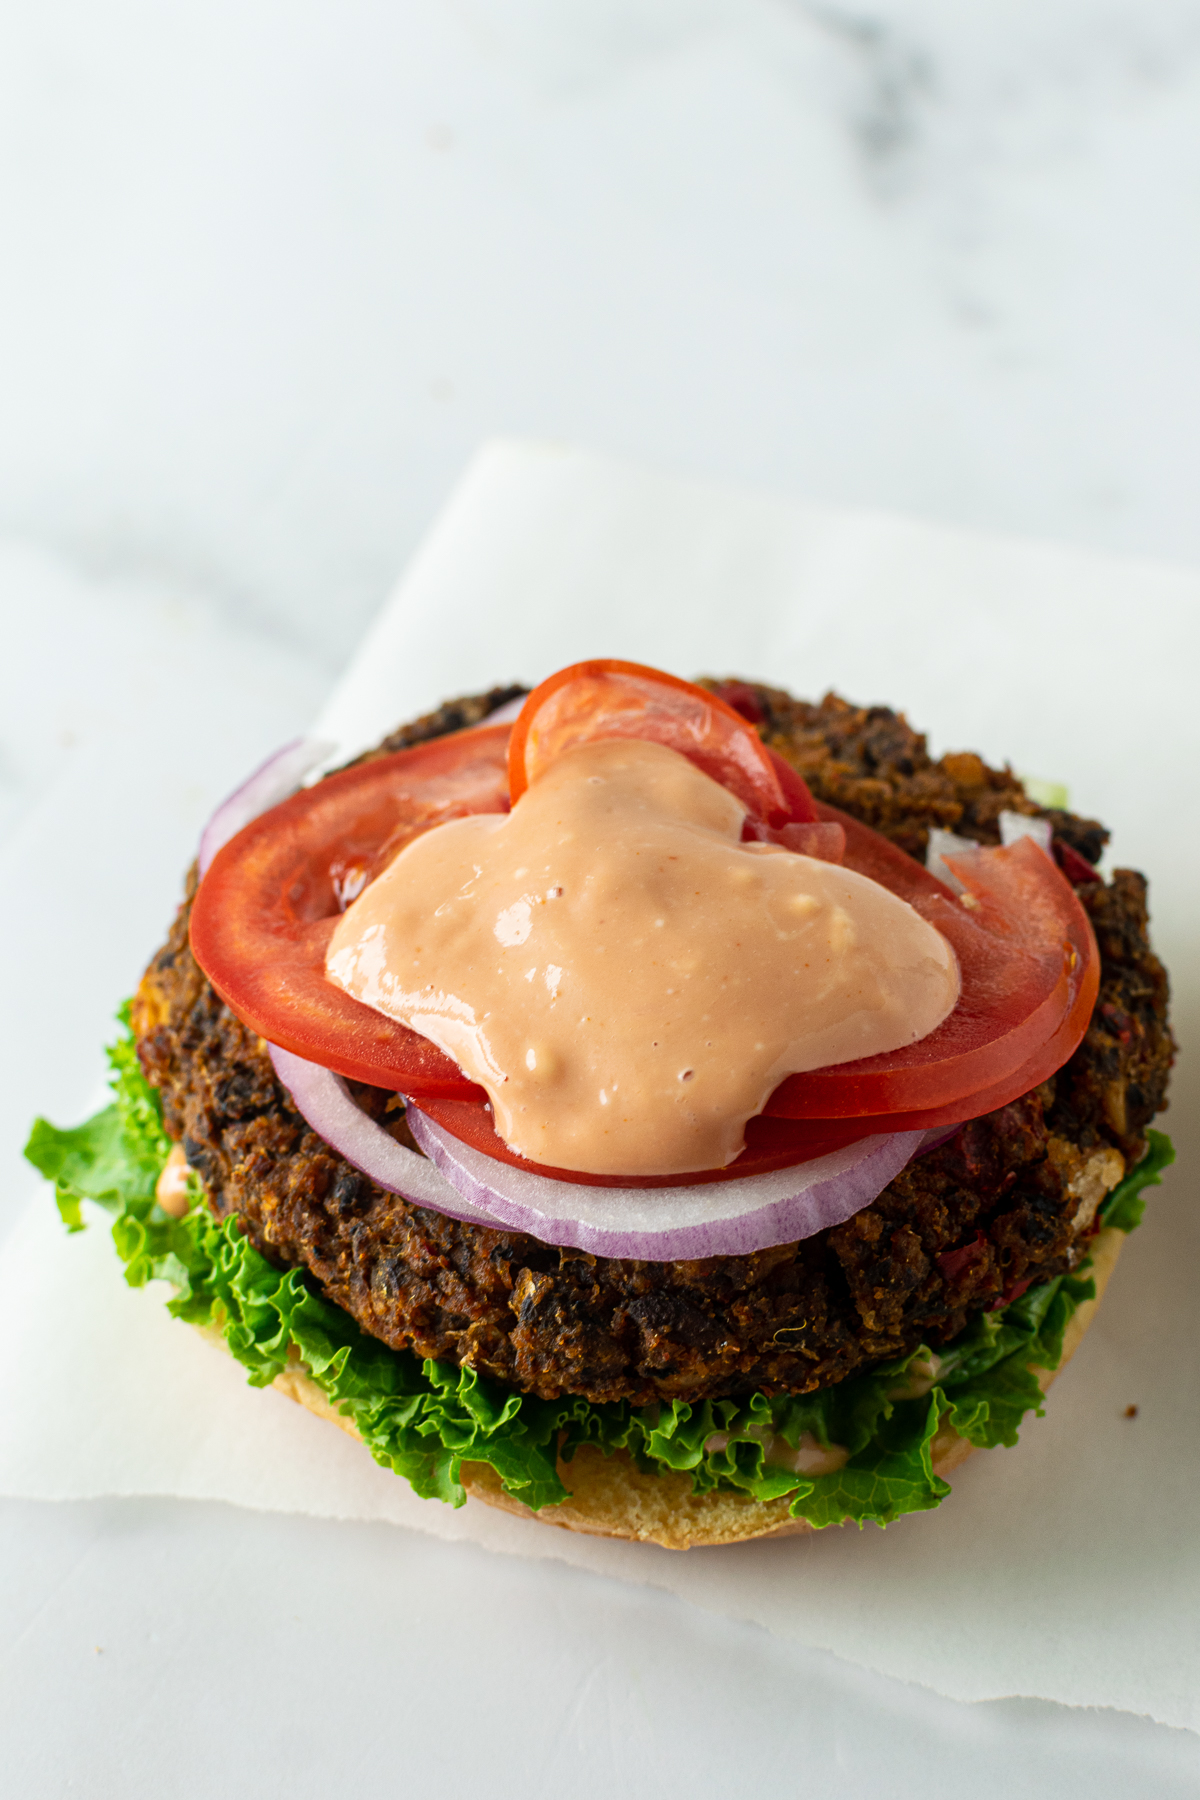 lettuce, tomato, onion and secret sauce on top of a veggie burger.